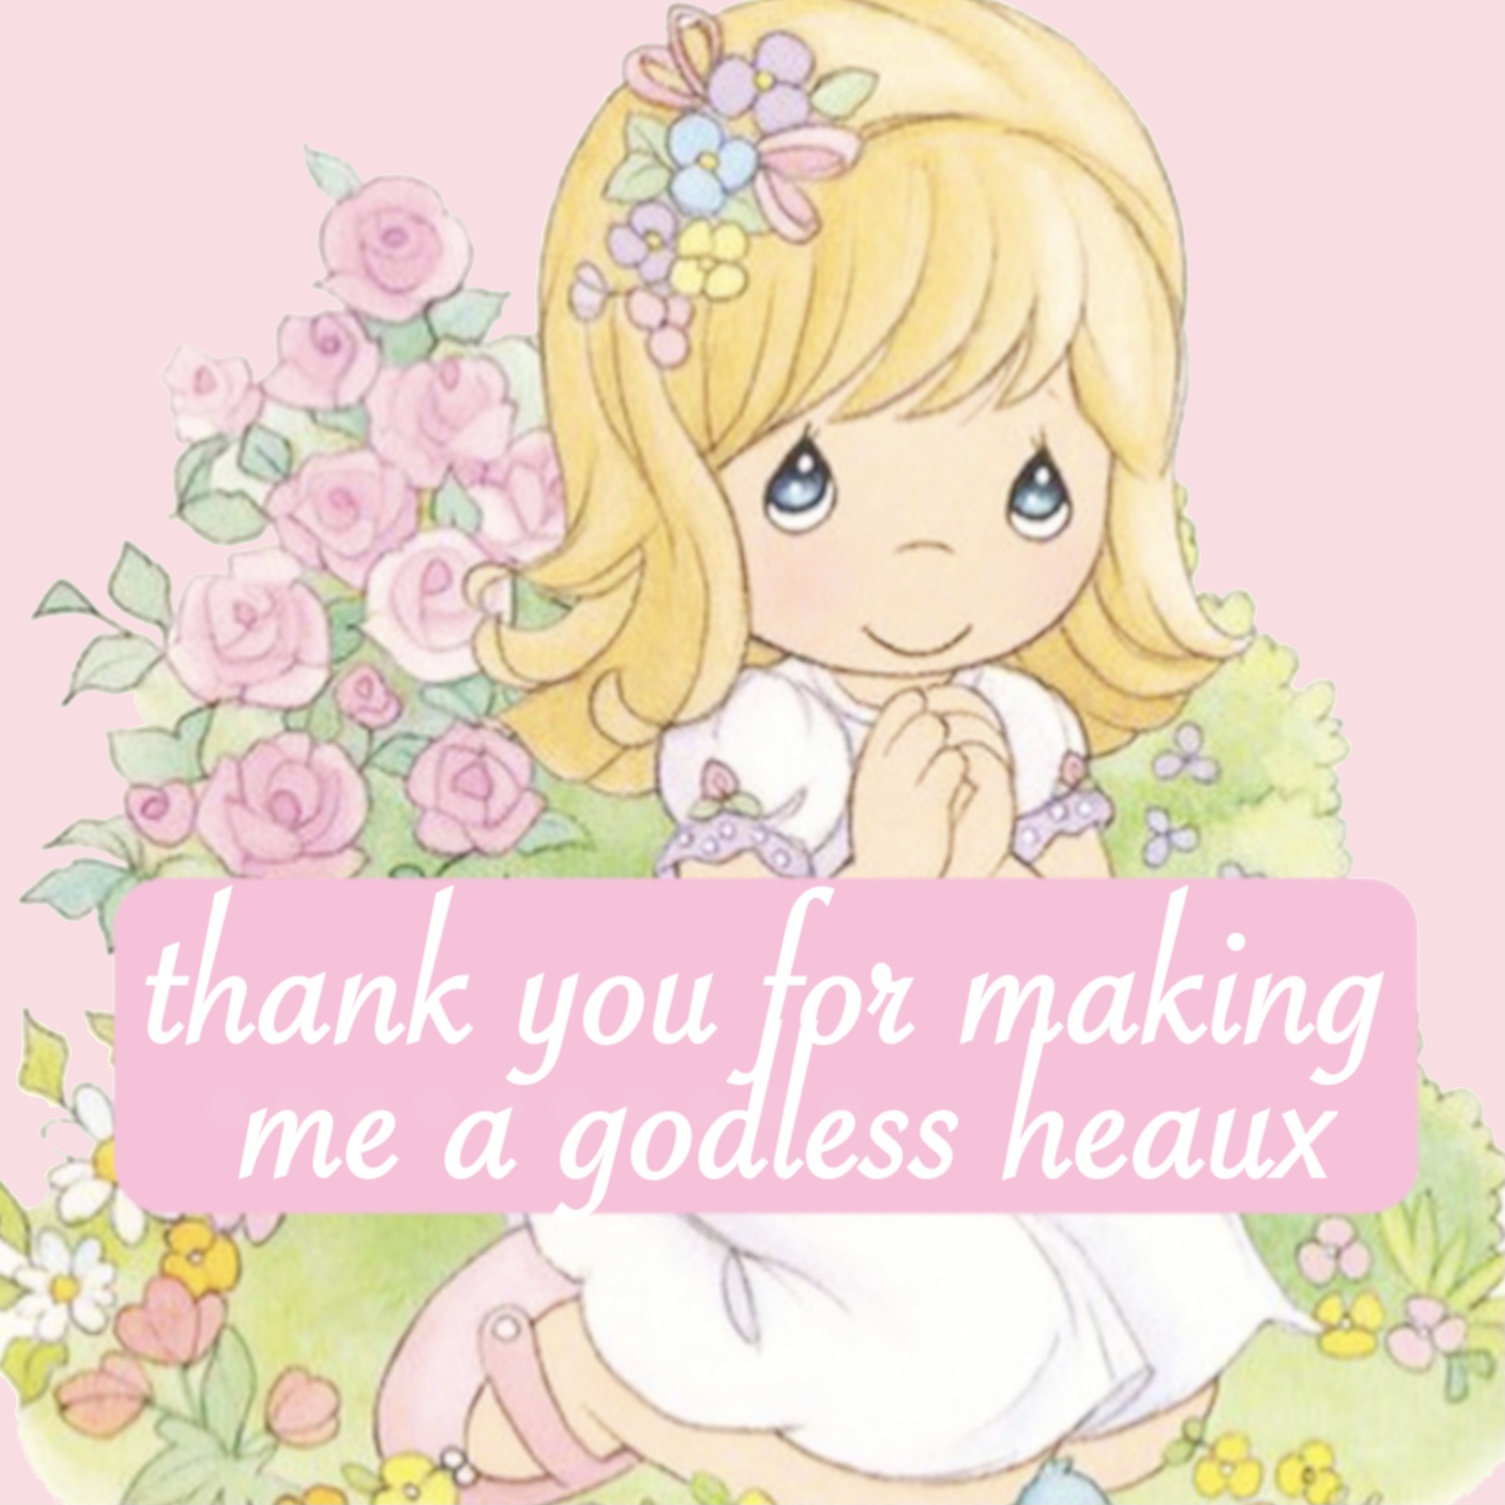 sticker with caption "thank you for making me a godless heaux"